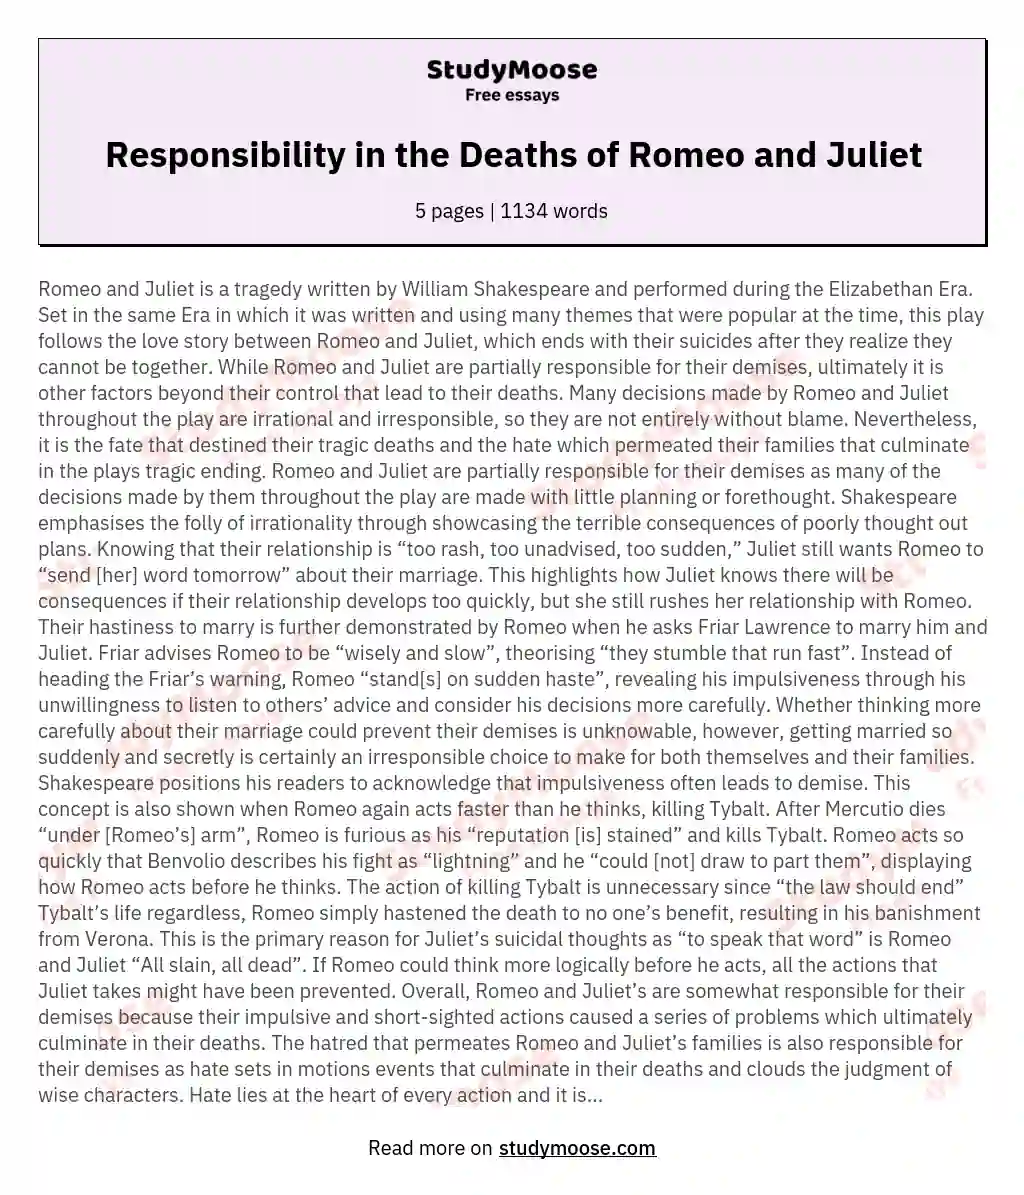 Responsibility in the Deaths of Romeo and Juliet